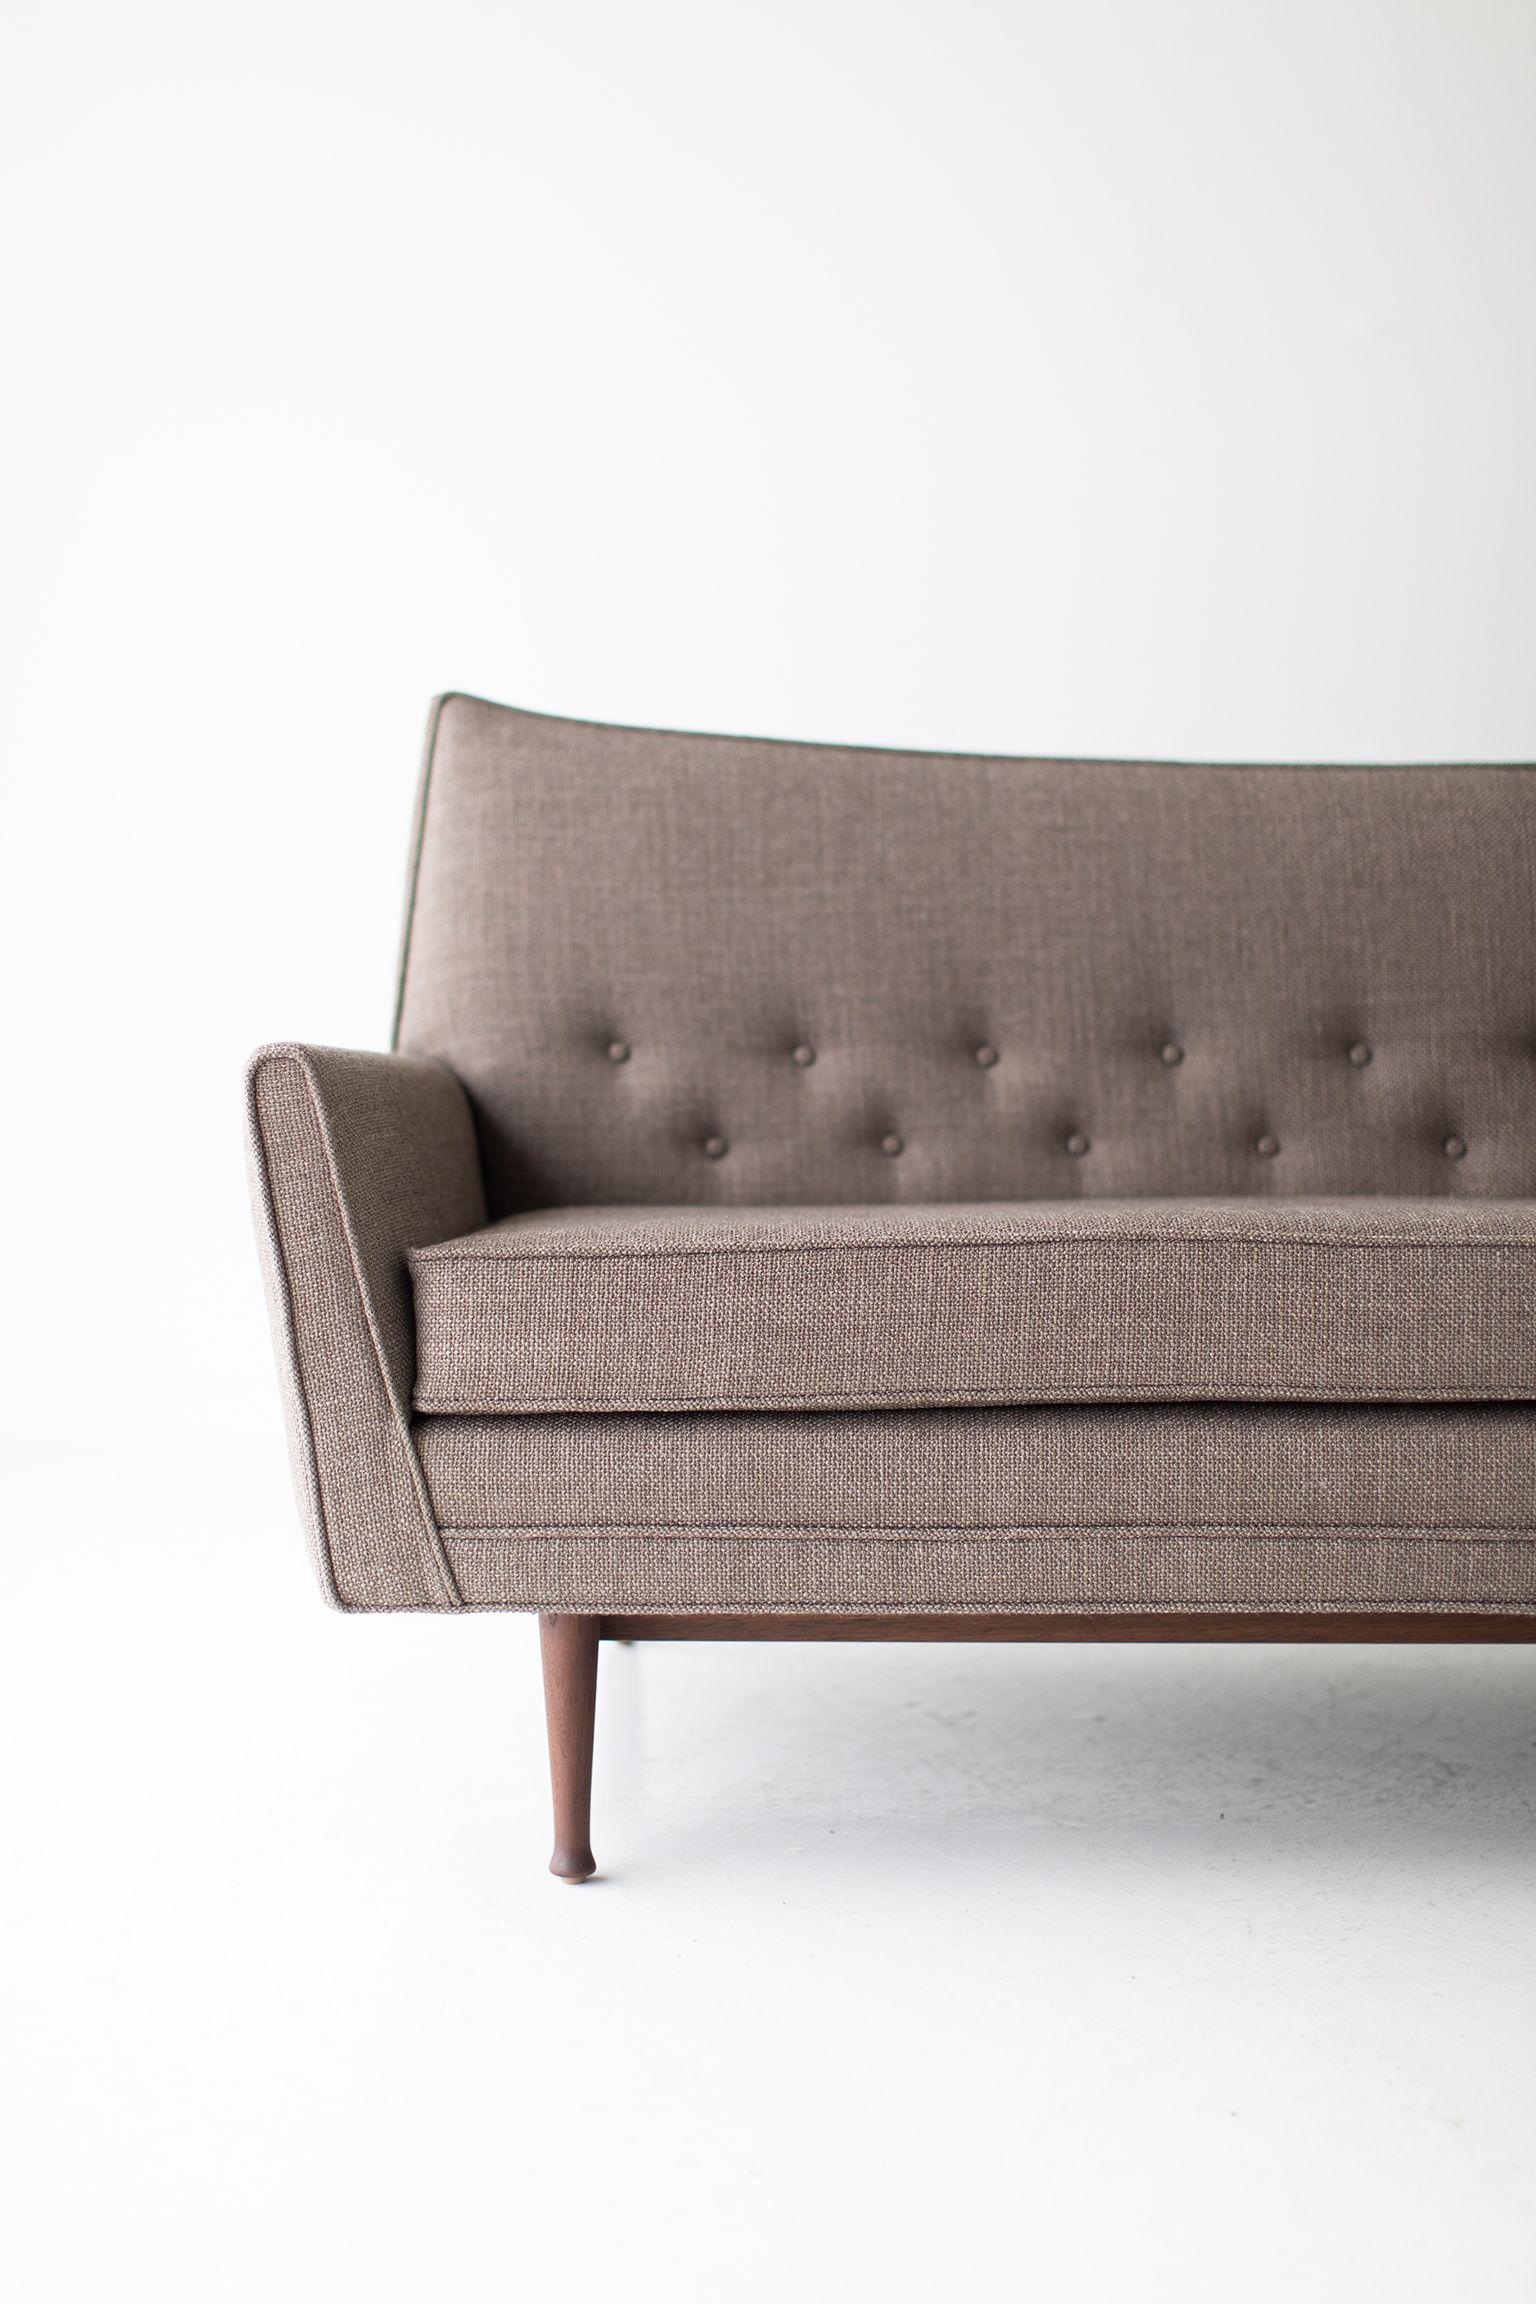 Designer: Lawrence Peabody

Manufacturer: Craft Associates Furniture
Period/Model: Mid-Century Modern
Specs: Walnut, thick weave fabric

This Lawrence Peabody modern sofa for Craft Associates Furniture is expertly handcrafted and upholstered.